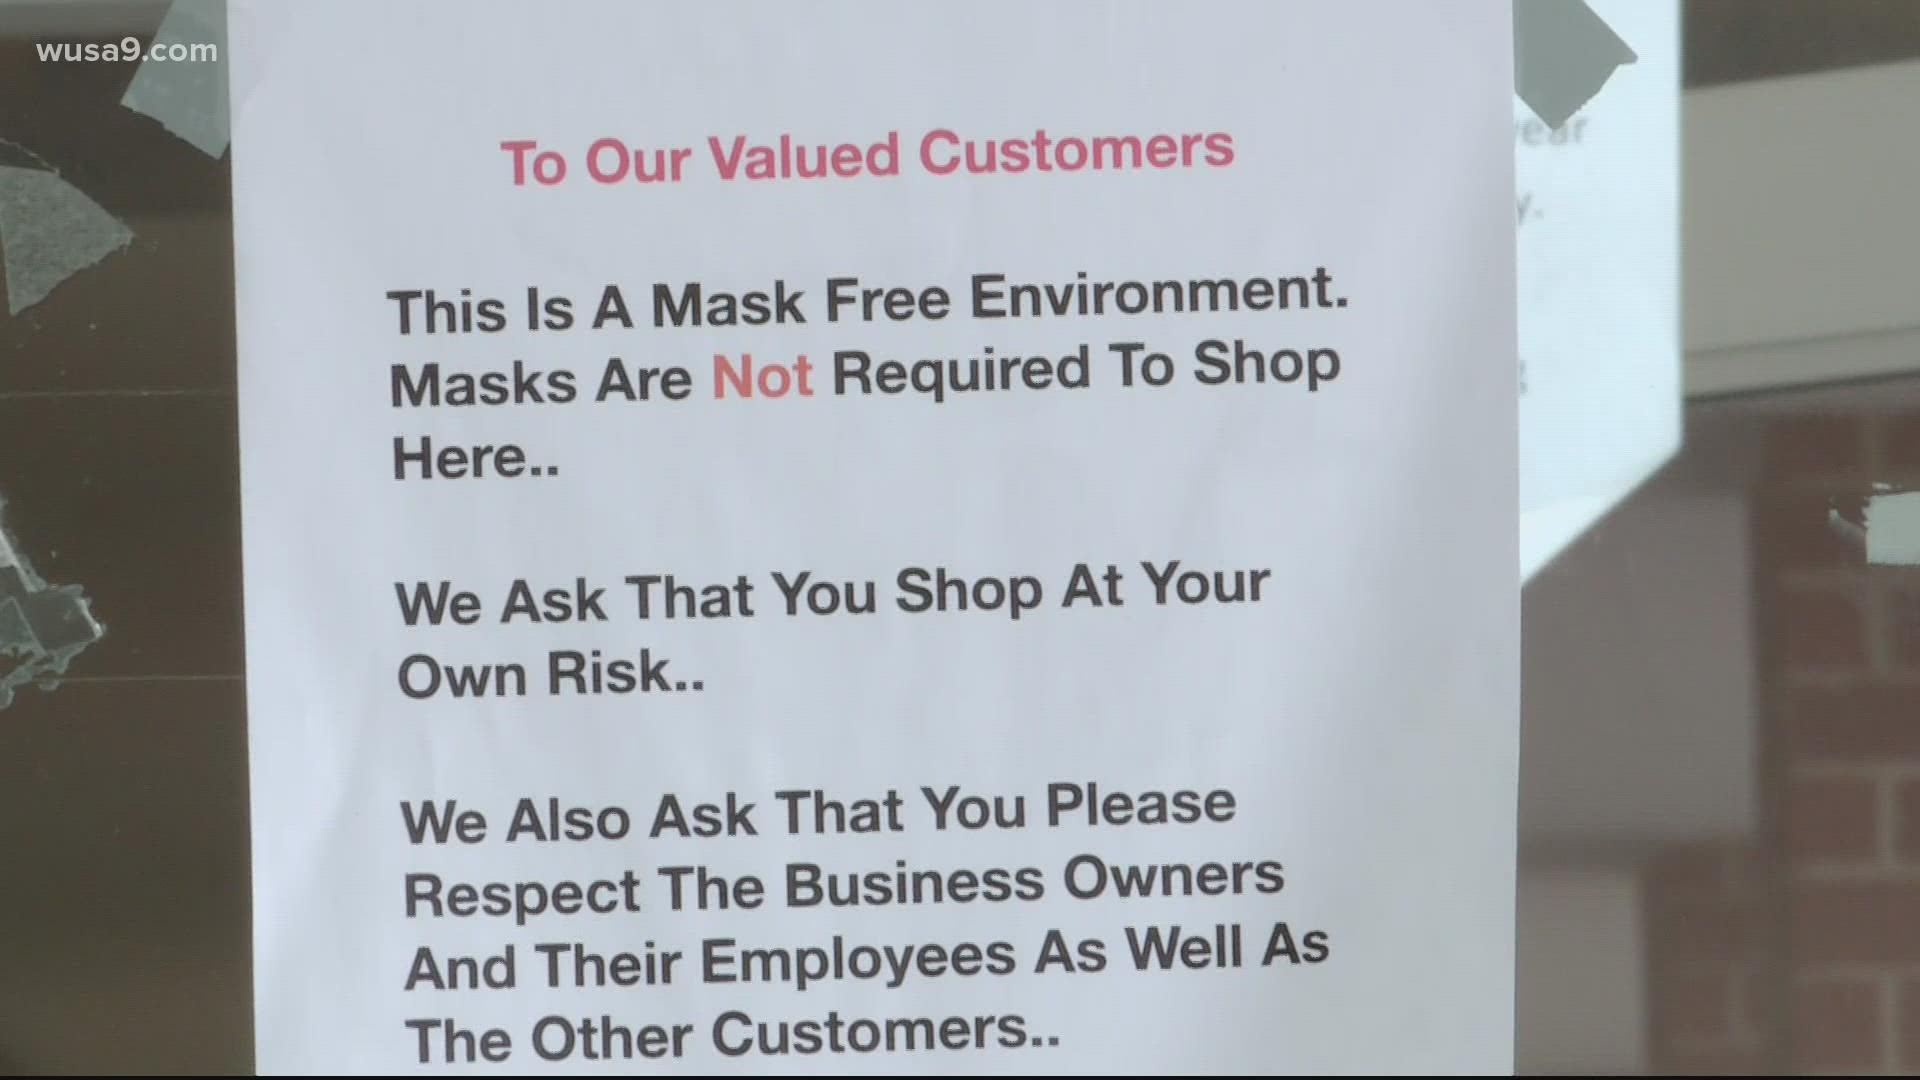 A sign above the main entrance reads "This is a mask free environment." and asks customers to shop at their own risk.